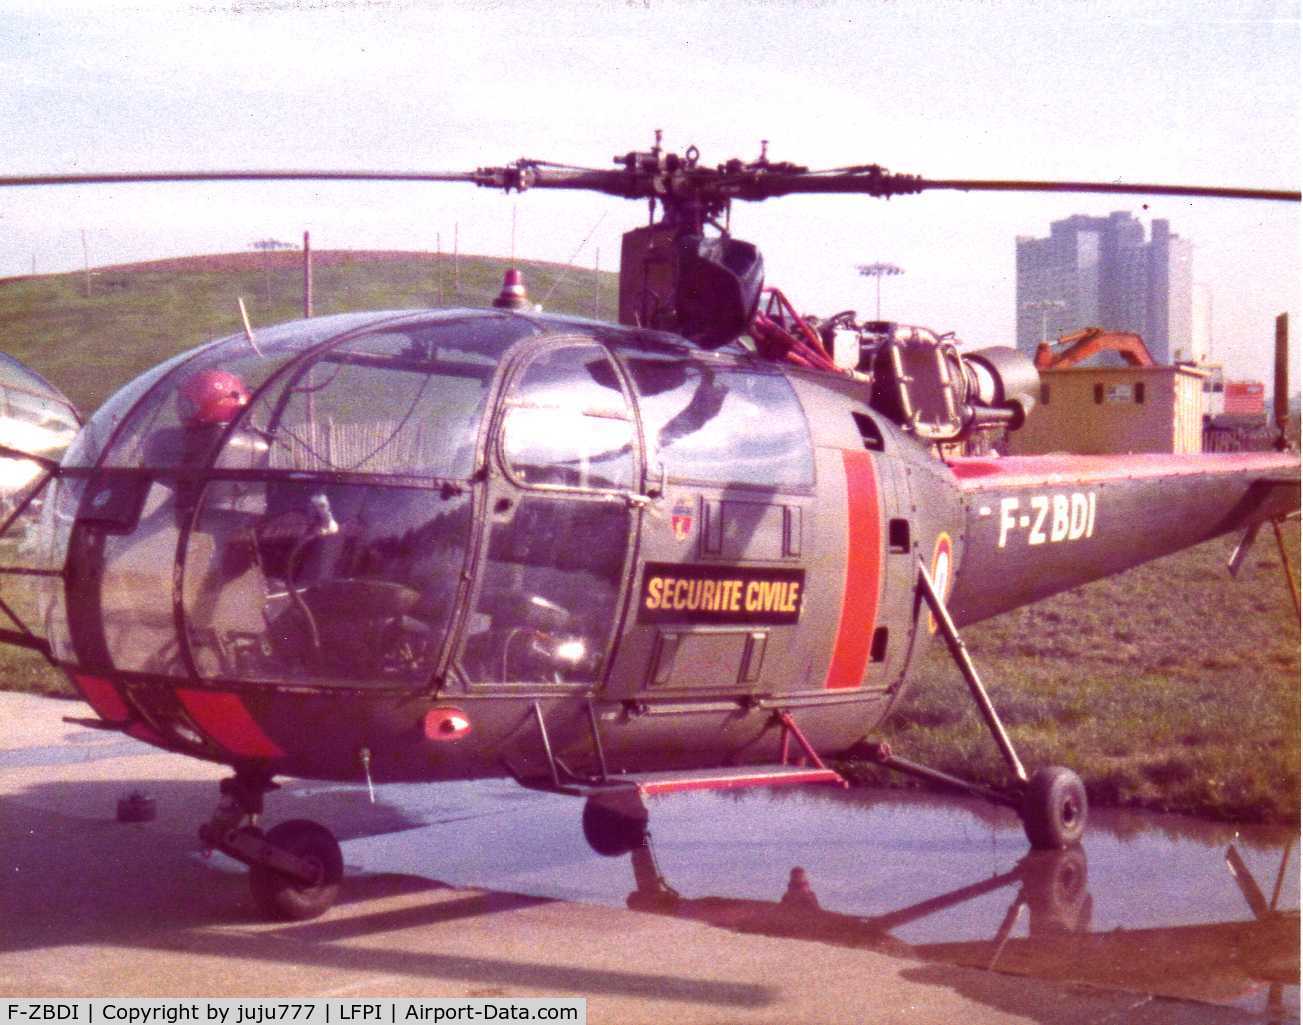 F-ZBDI, 1984 Aérospatiale SA 316B Alouette III C/N 1878, at Issy-les-Moulineaux